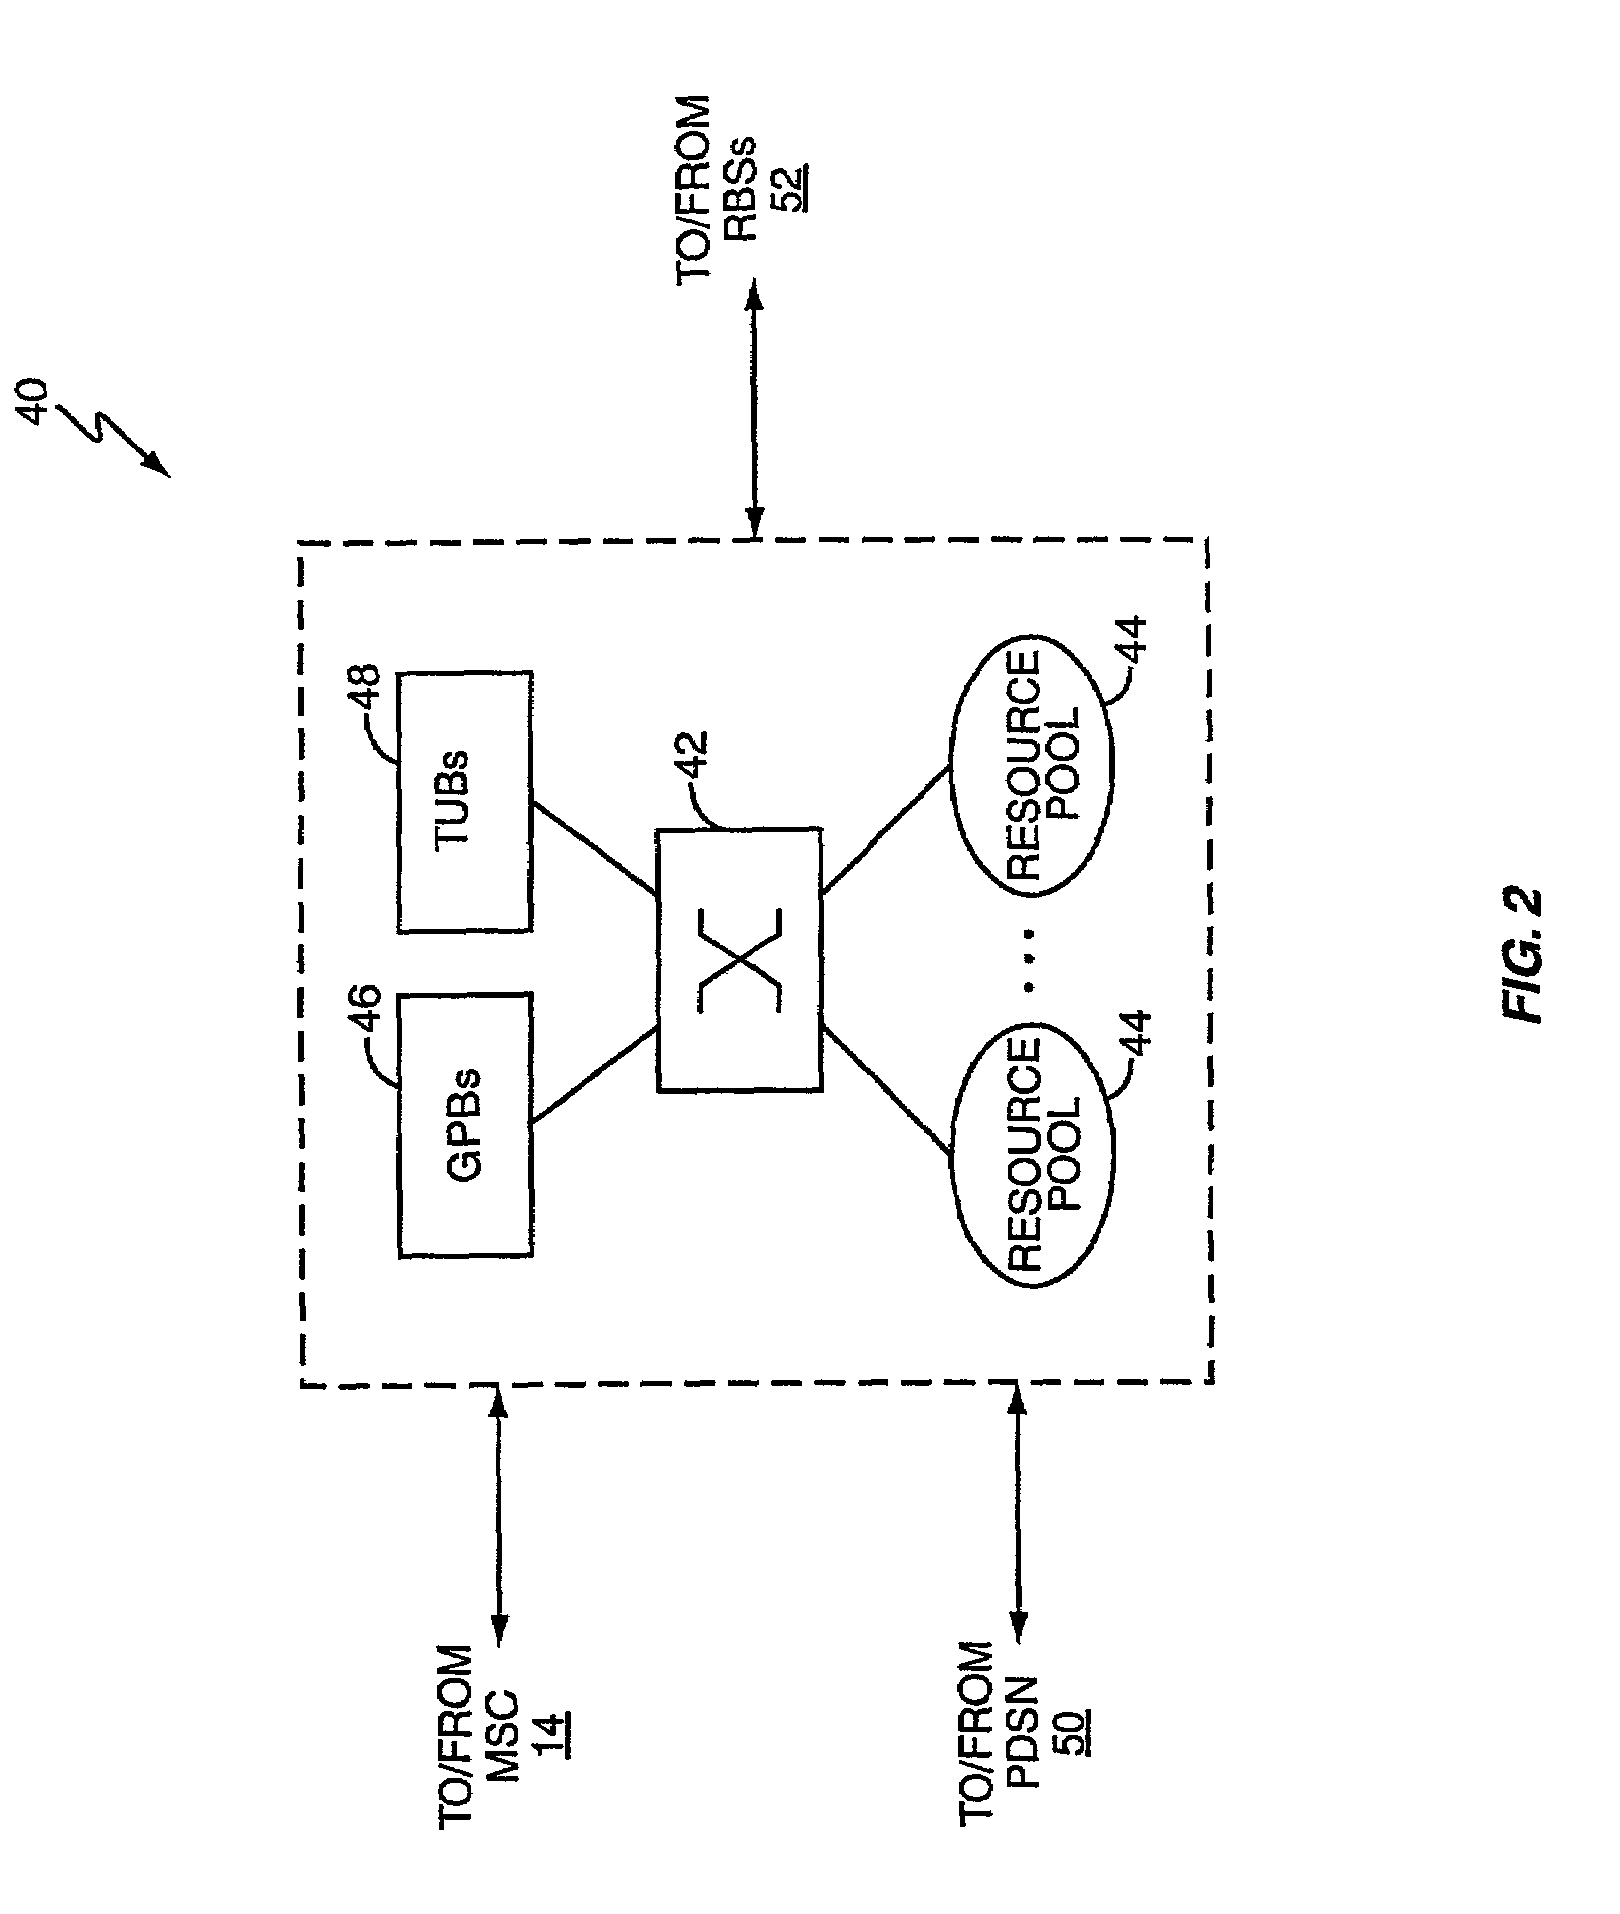 Robust radio base station controller architecture